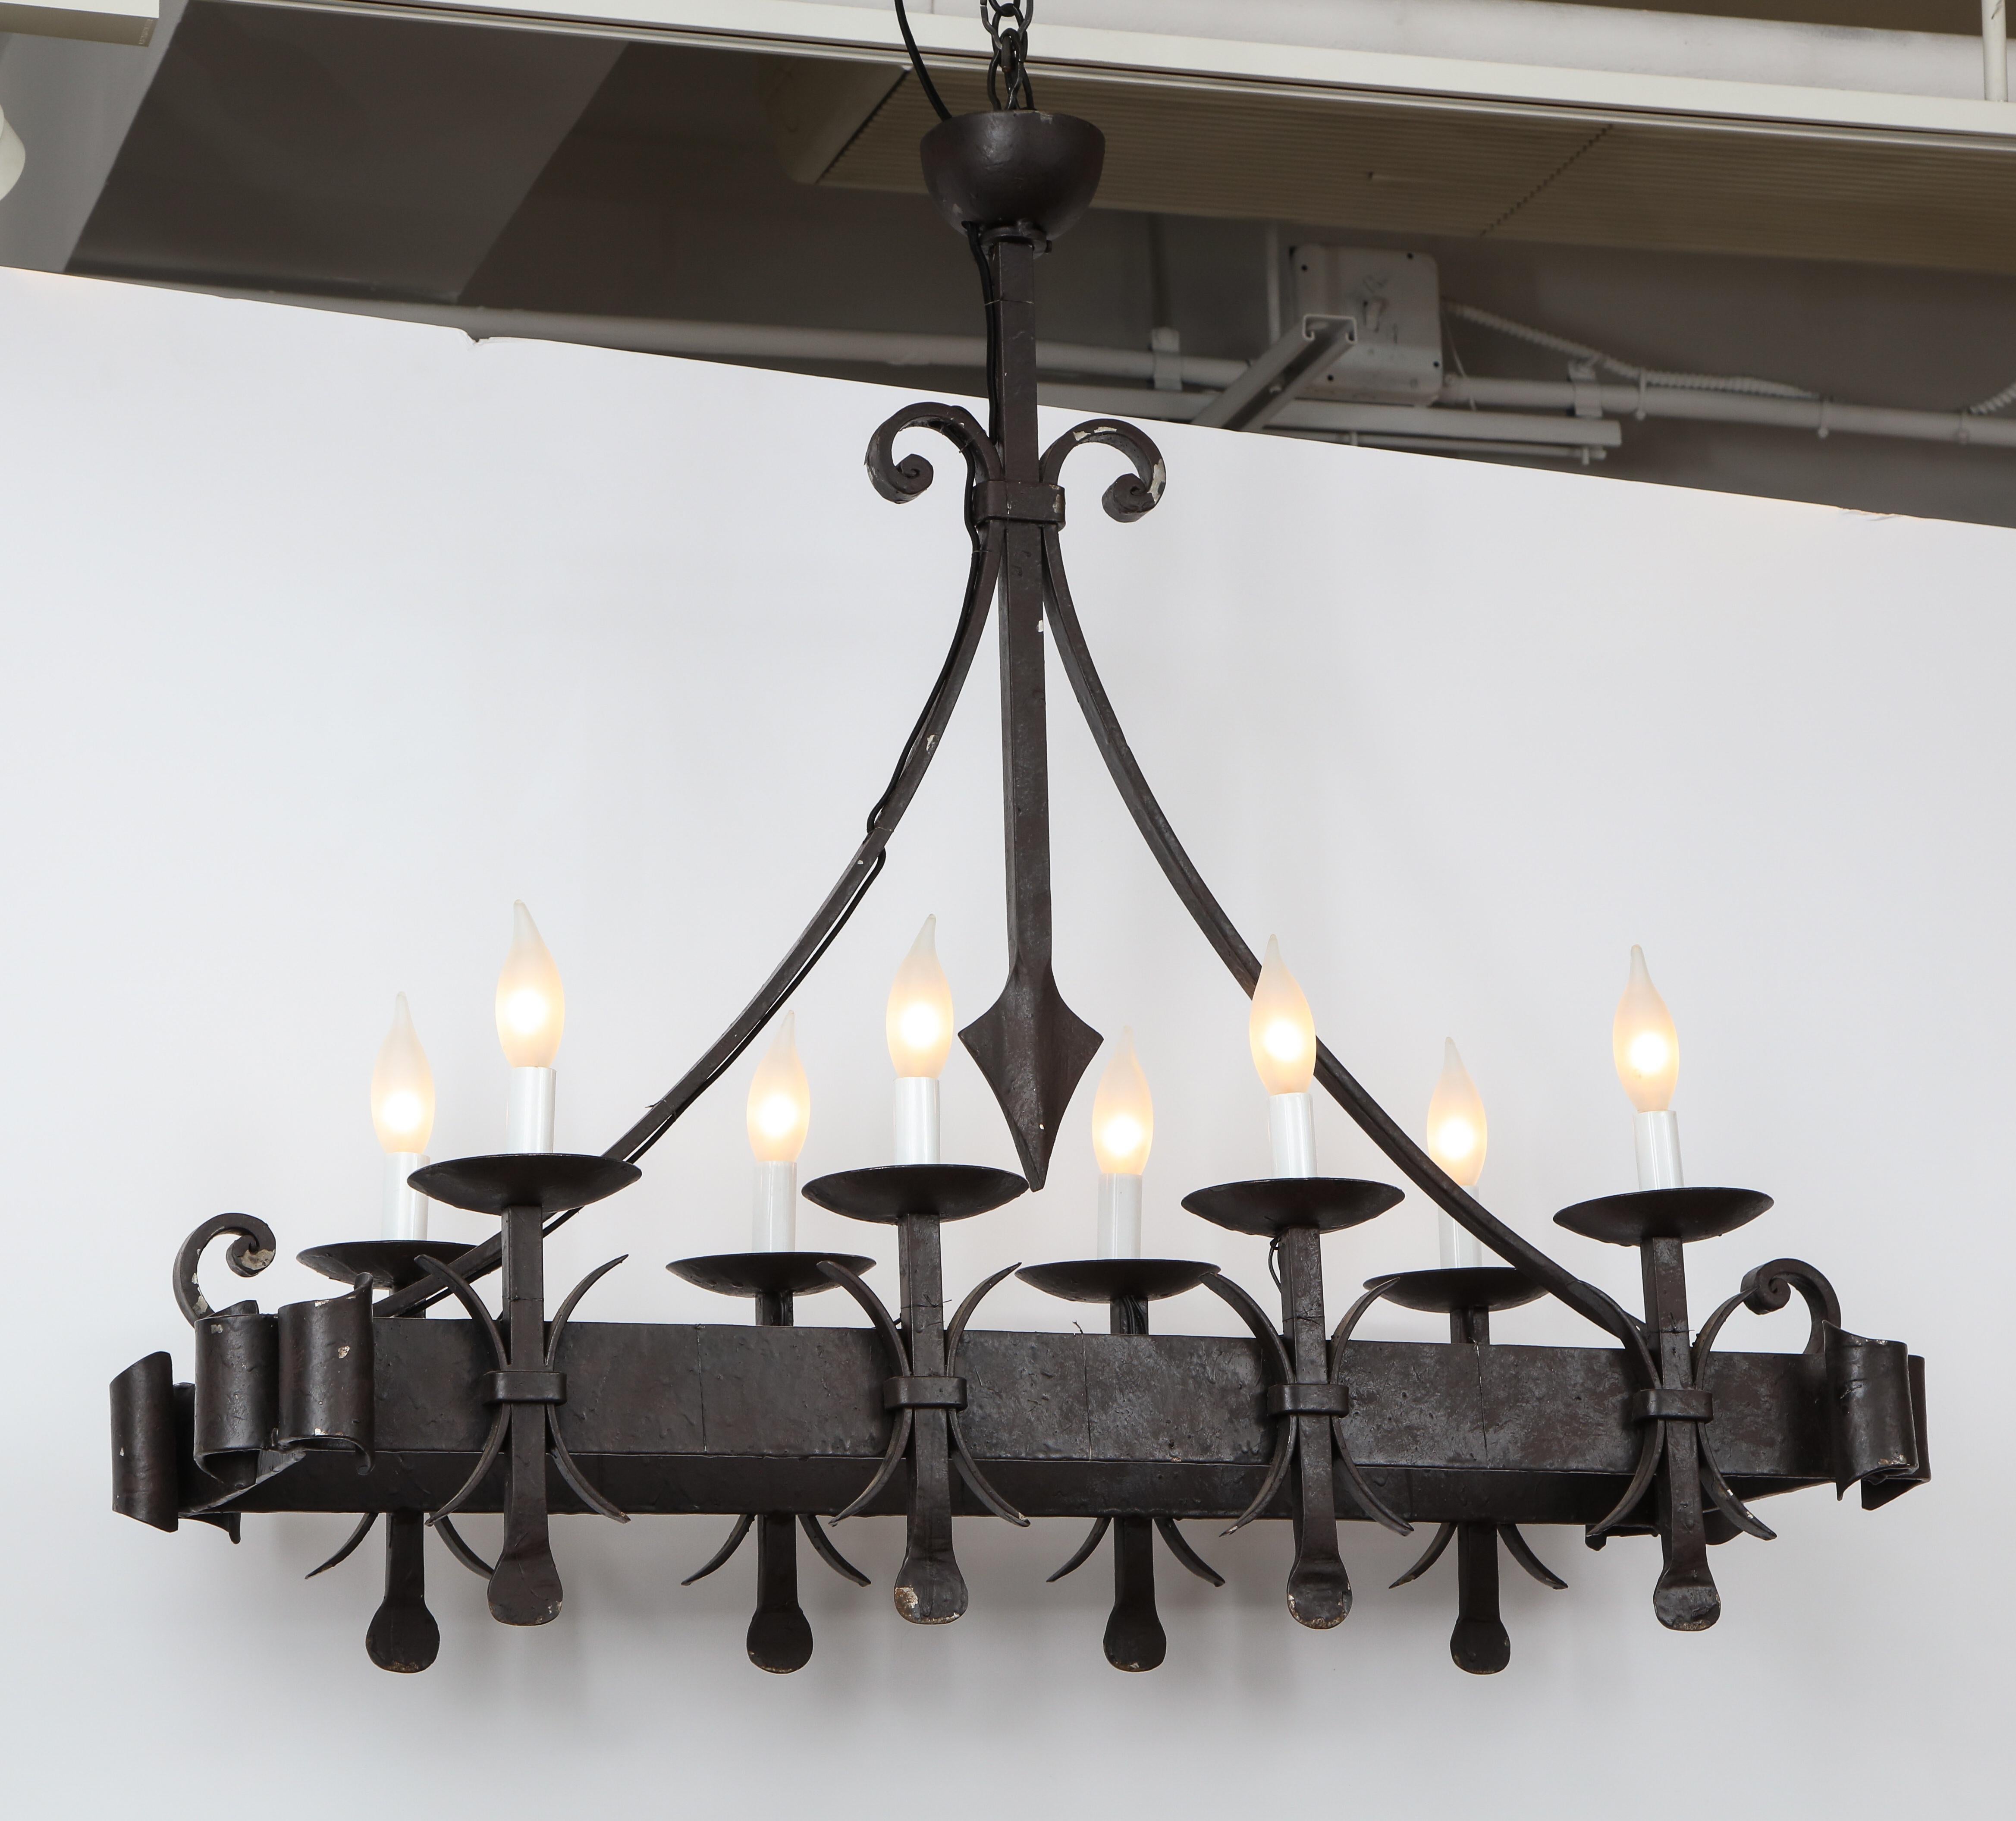 Black painted wrought iron rectangular chandelier with 8 lights